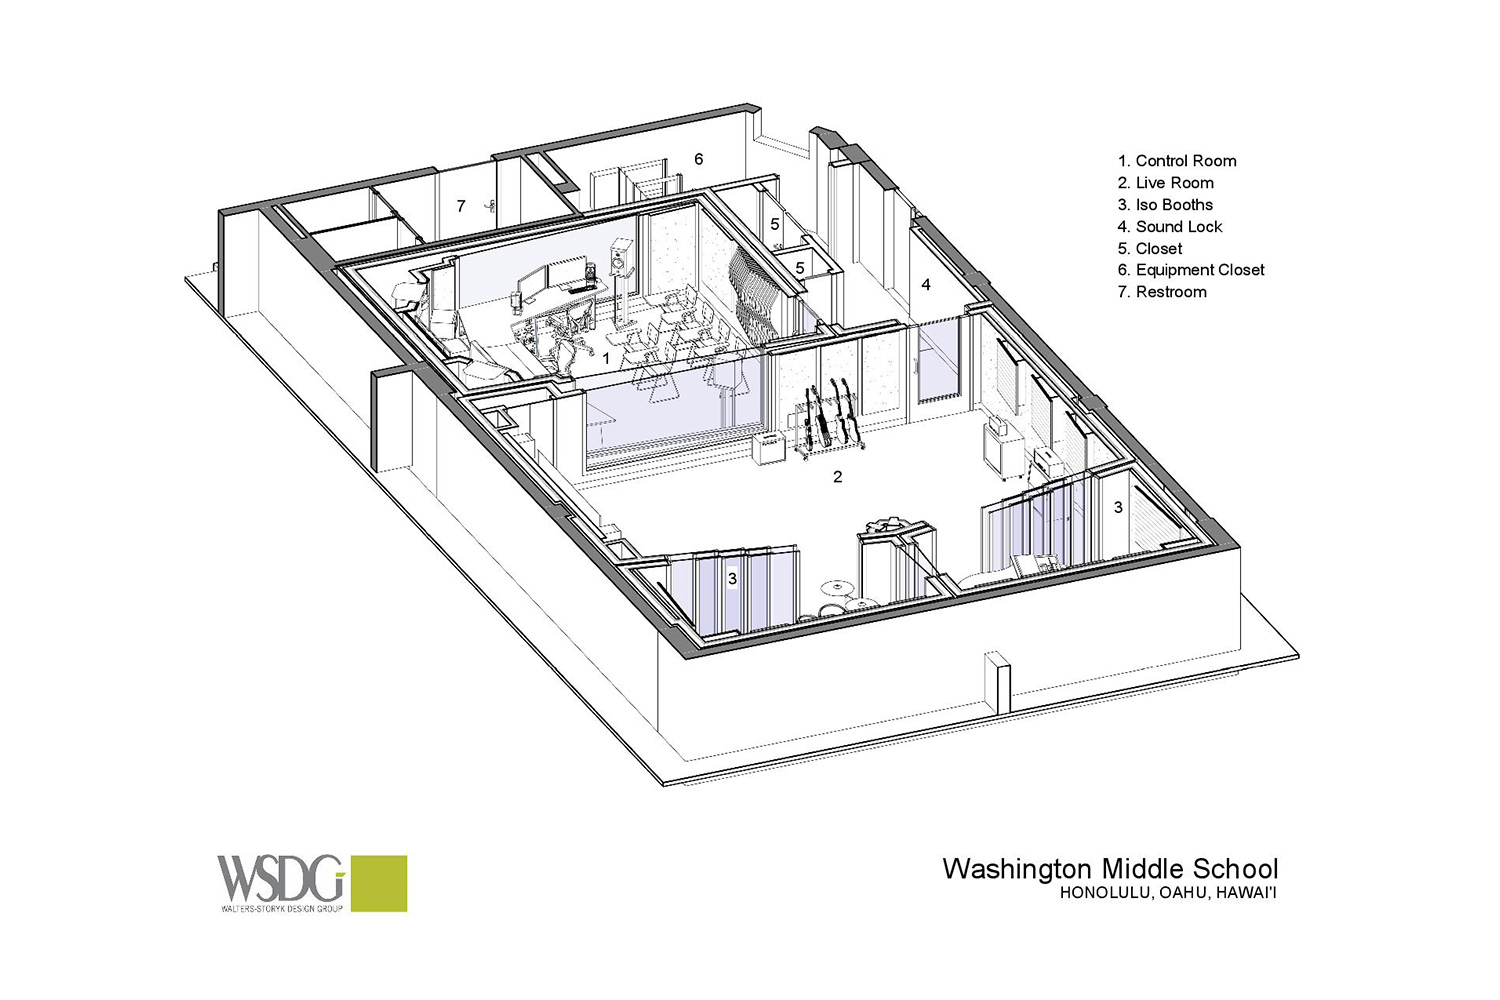 One of Hawaii’s only schools providing students with both pro audio and pro video production training, the Washington Middle School reached out to WSDG to create a state-of-the-art dual-purpose teaching studio. Axonometric drawing.